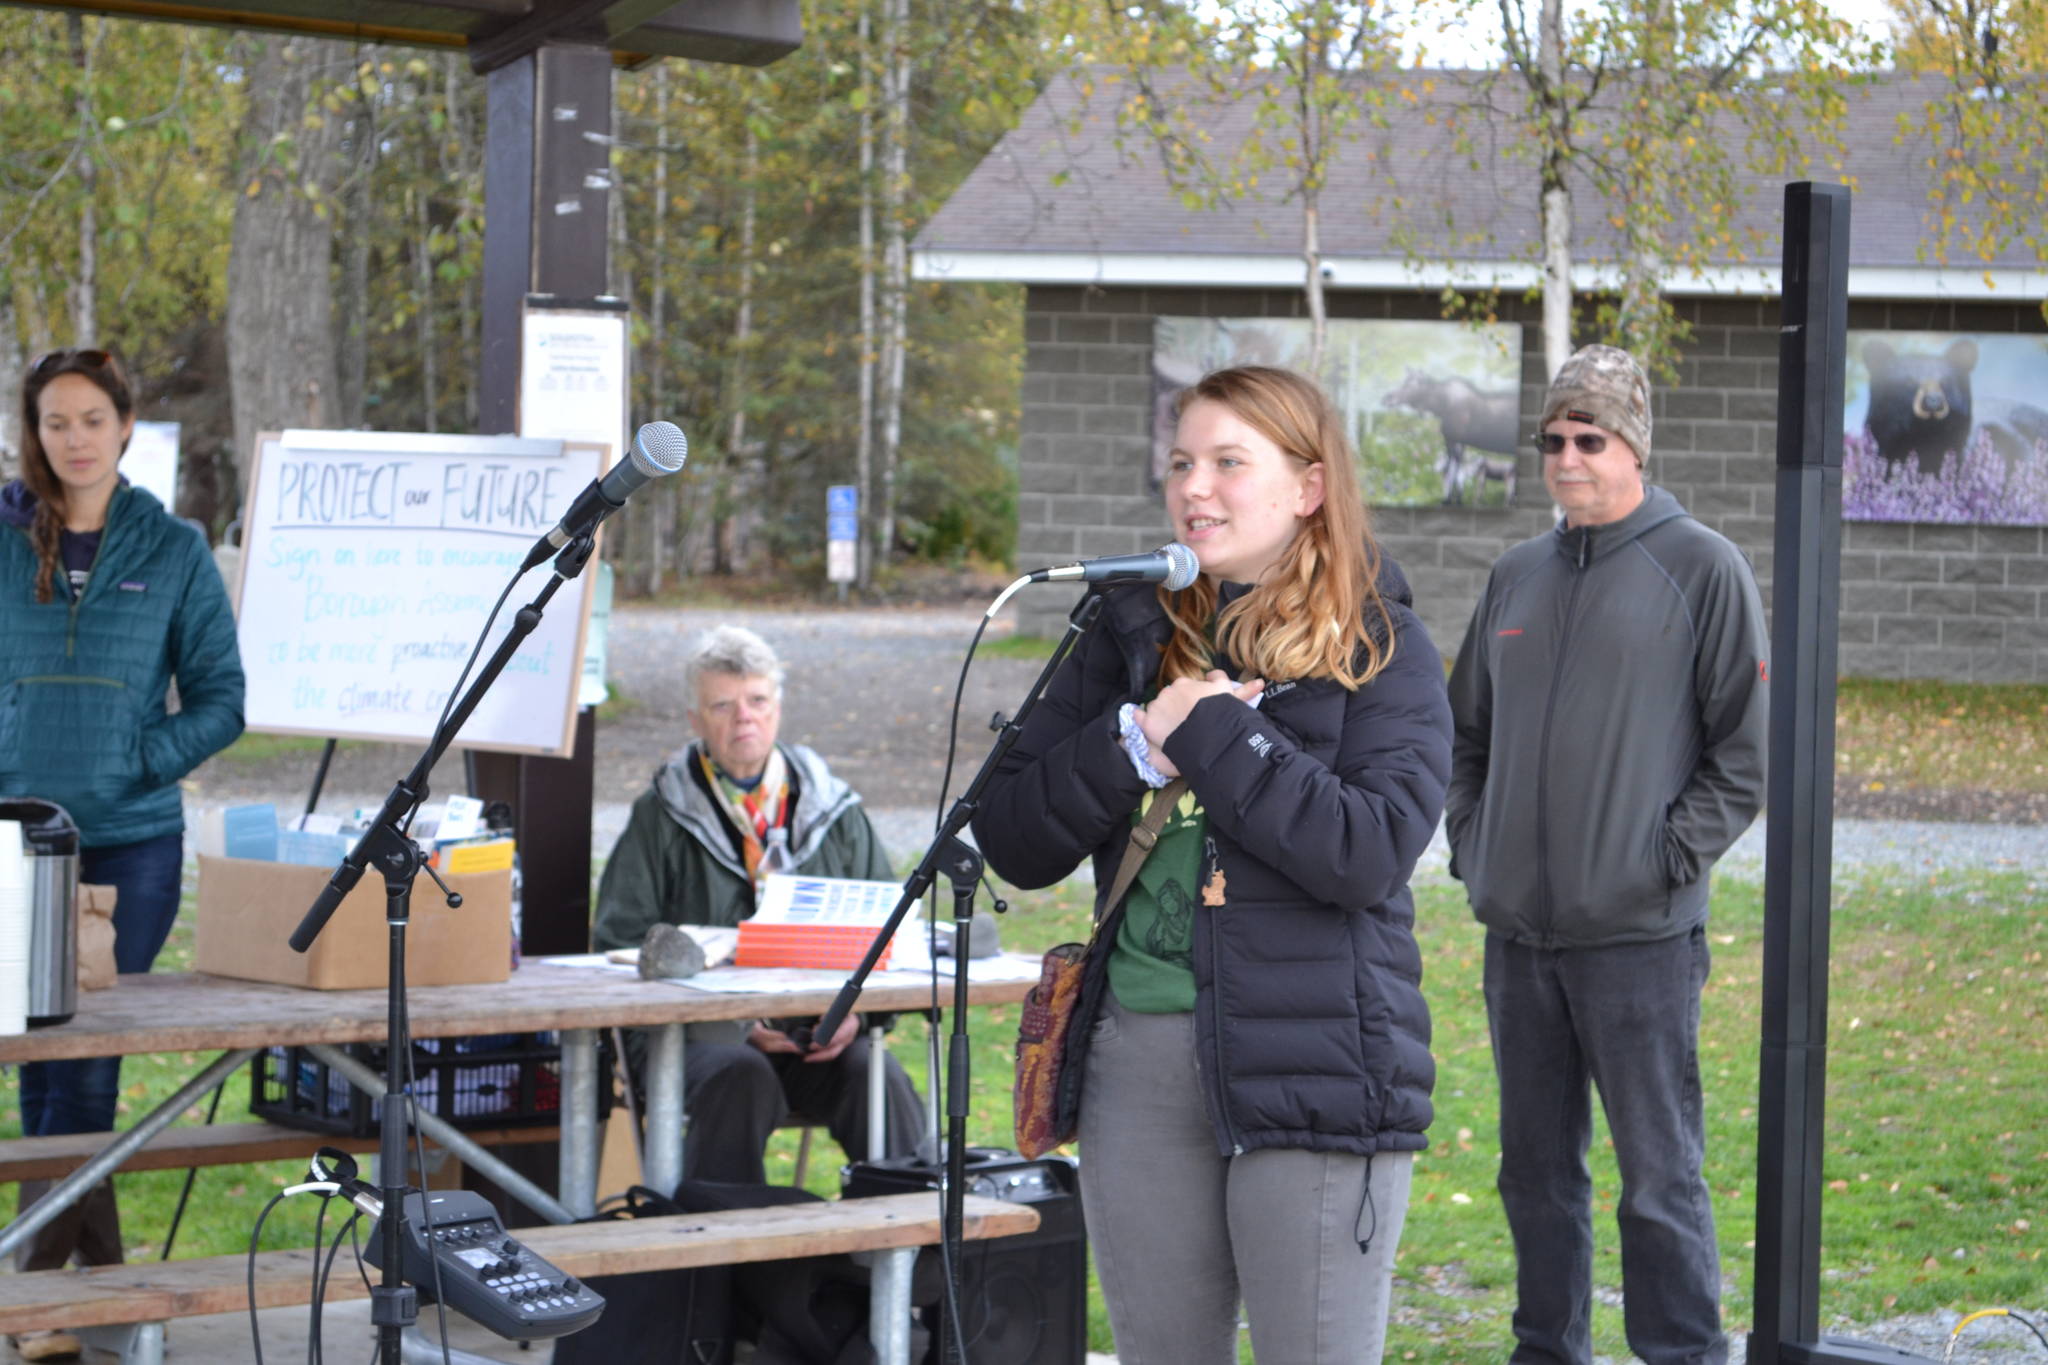 Youth organizer Eve Downing speaks to participants in the Soldotna Climate Strike at Soldotna Creek Park on Sept. 20, 2019. (Photo by Brian Mazurek/Peninsula Clarion)